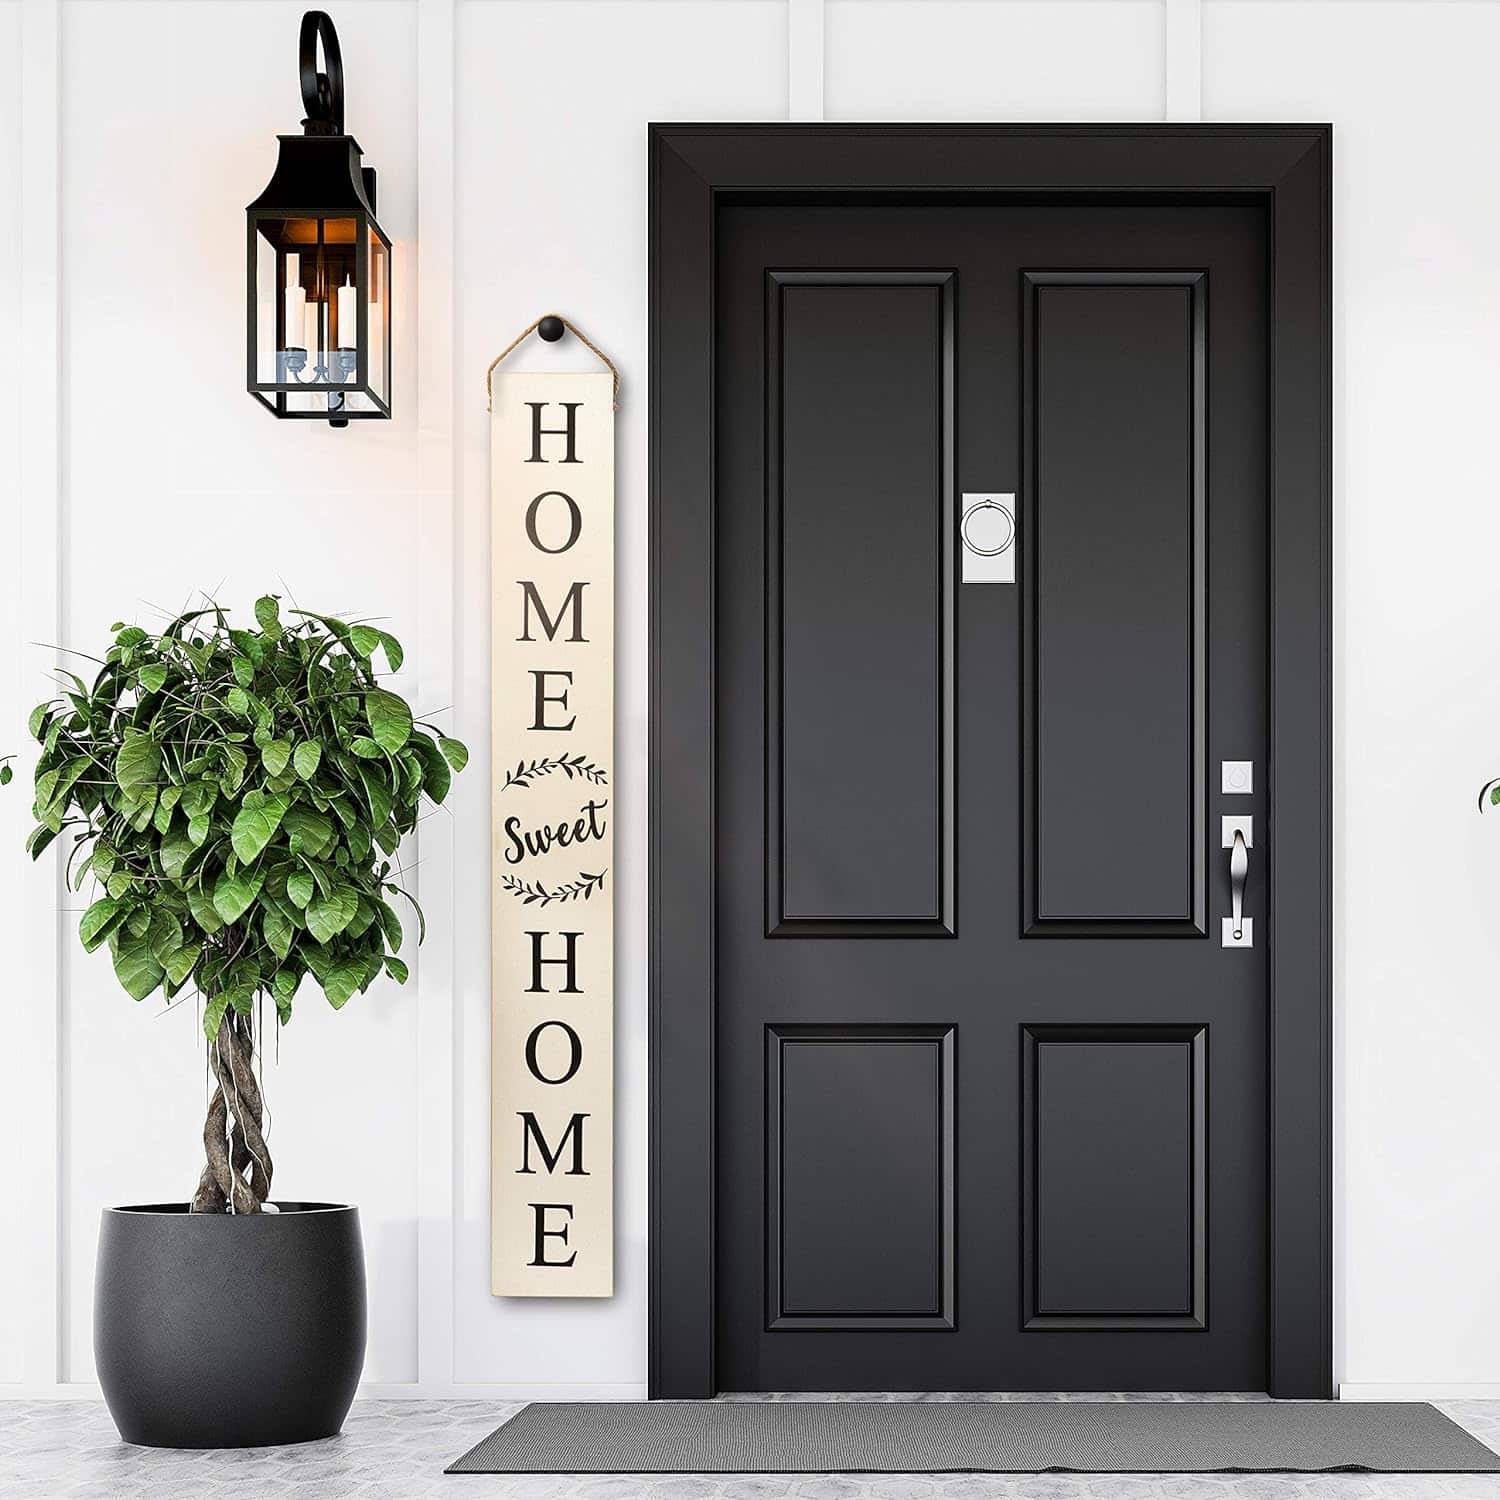 MAINEVENT Tall Outdoor Welcome Sign: A Rustic and Charming Addition to Your Front Porch